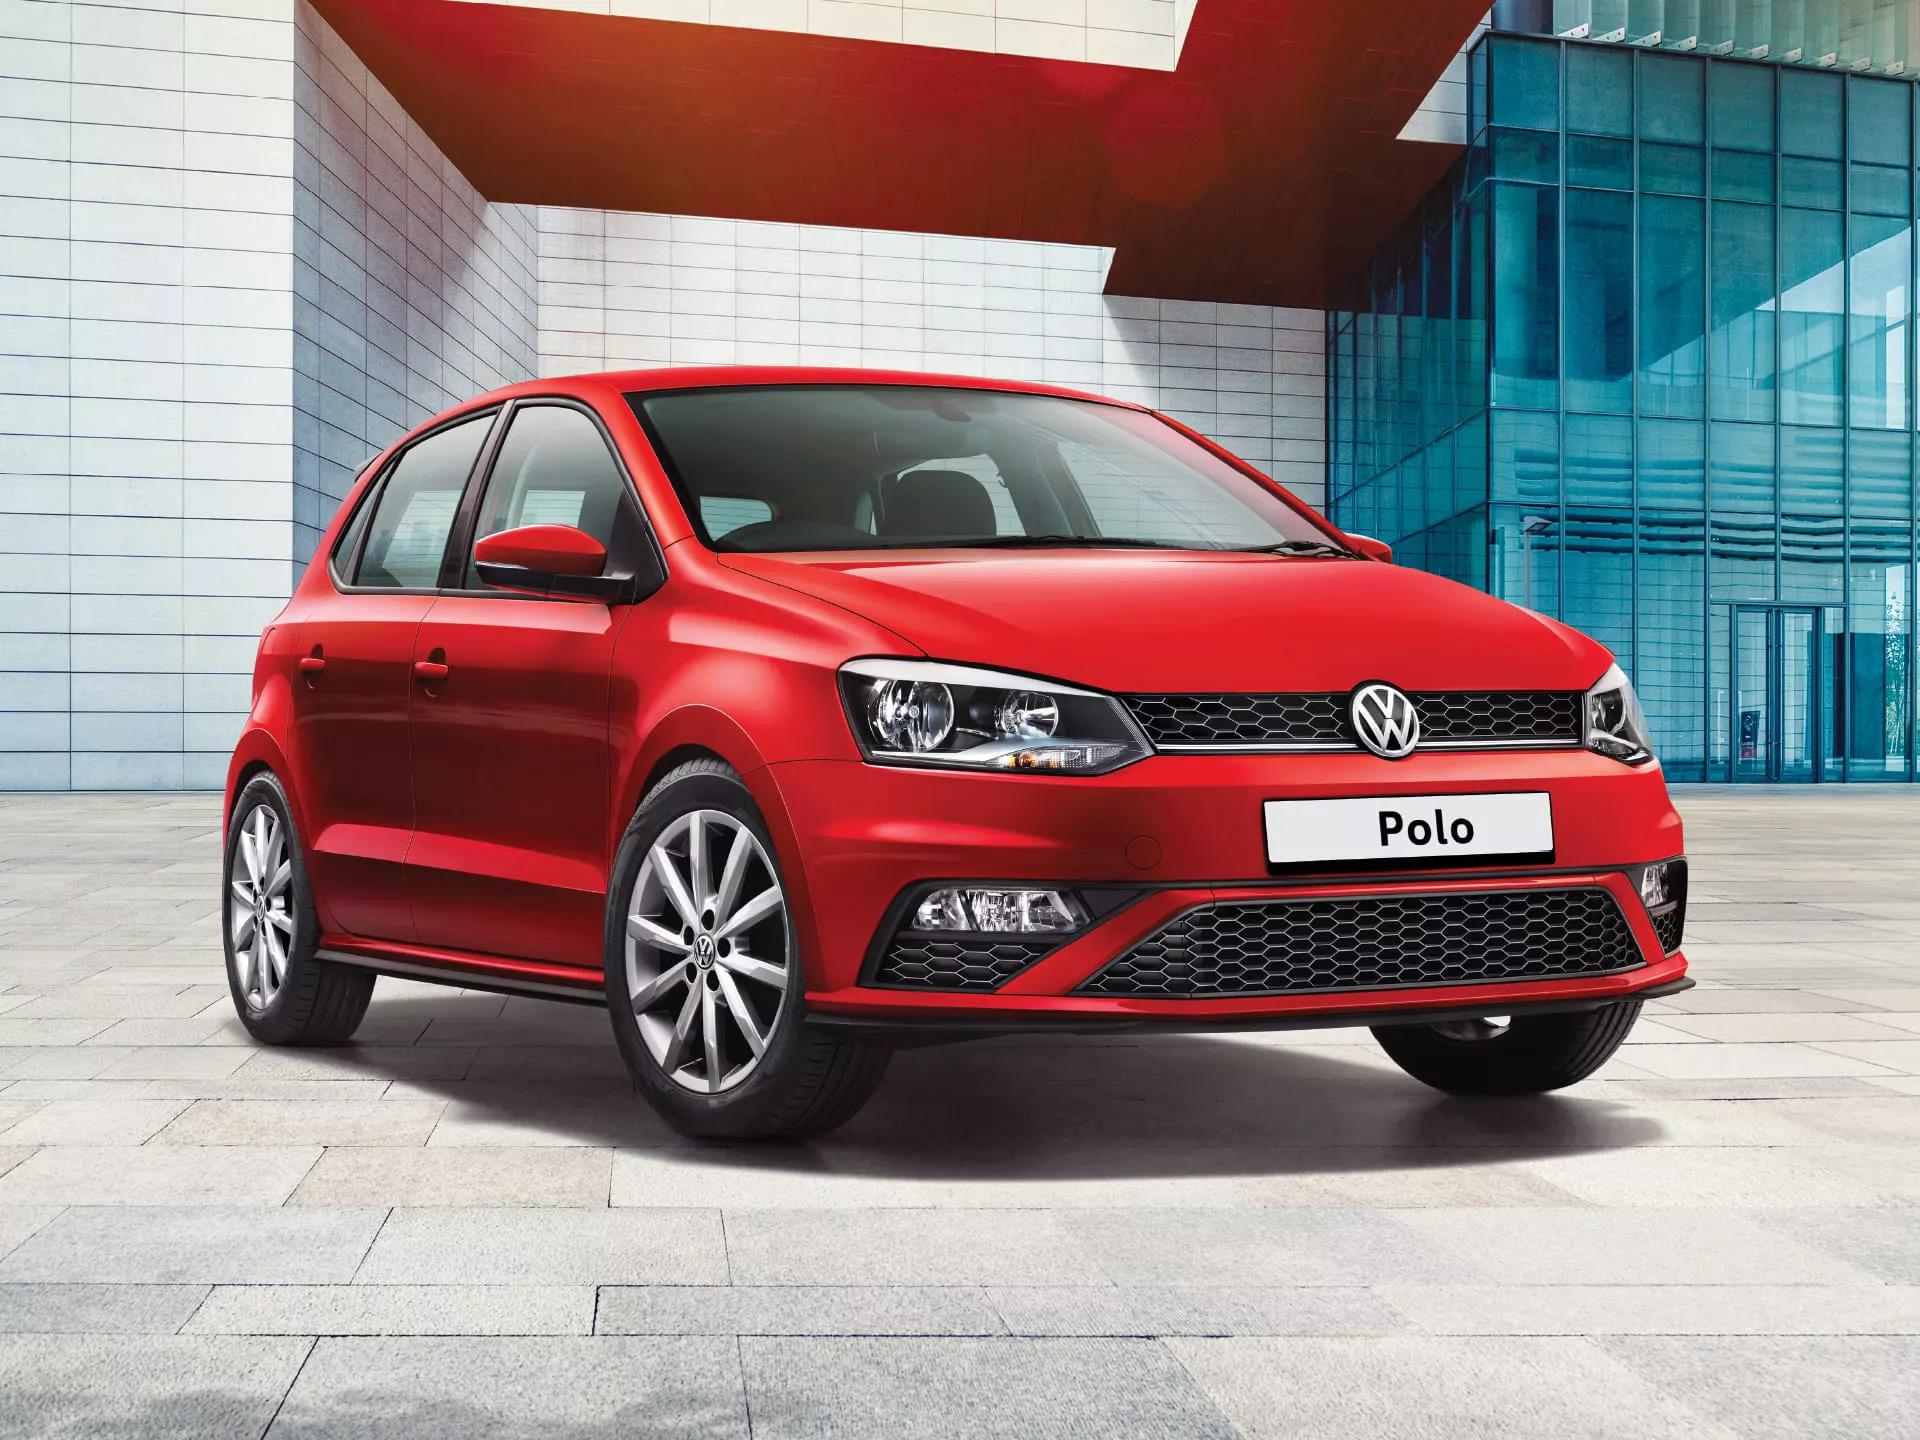 Volkswagen Polo Highline Plus Automatic Specs amp Price in India